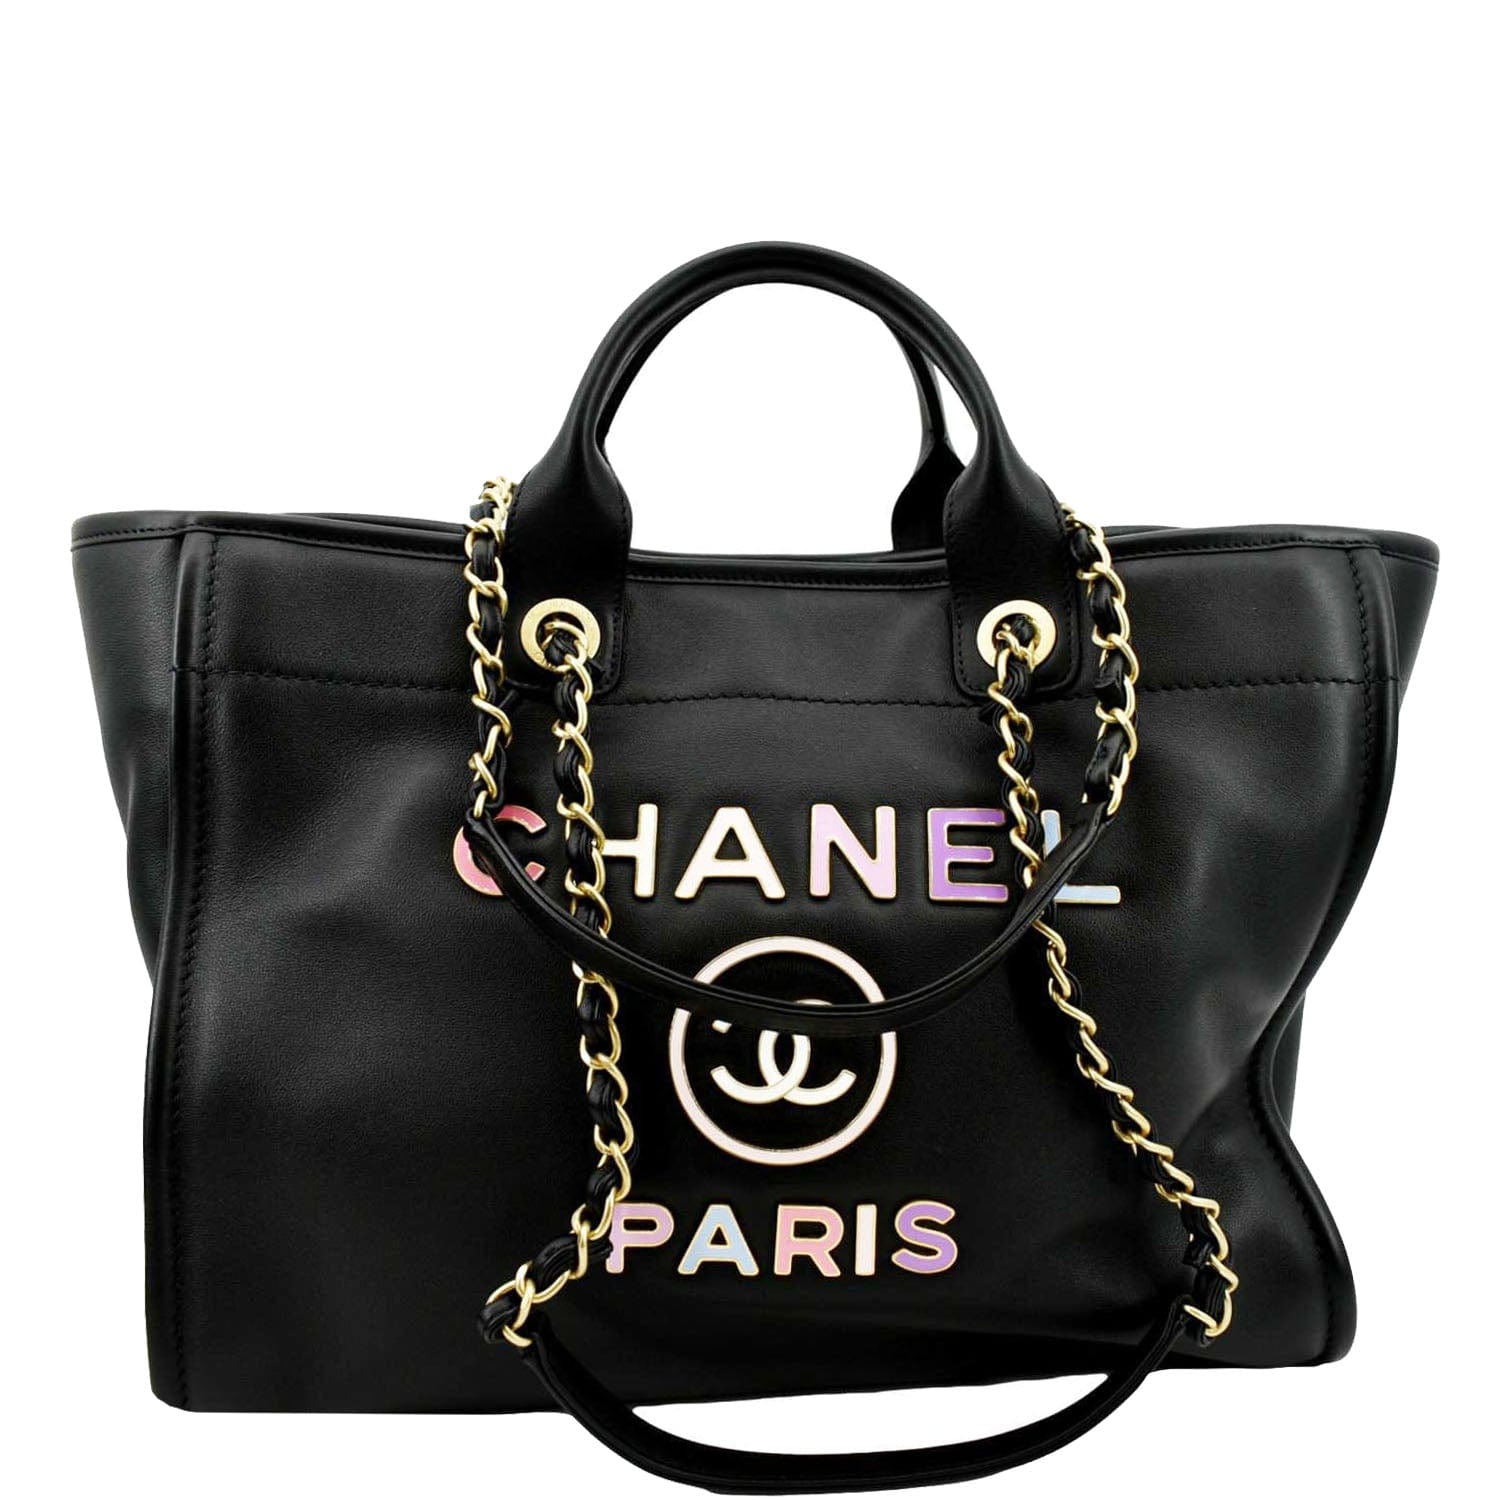 Chanel Black Straw and Leather Small Deauville Shopper Tote Chanel